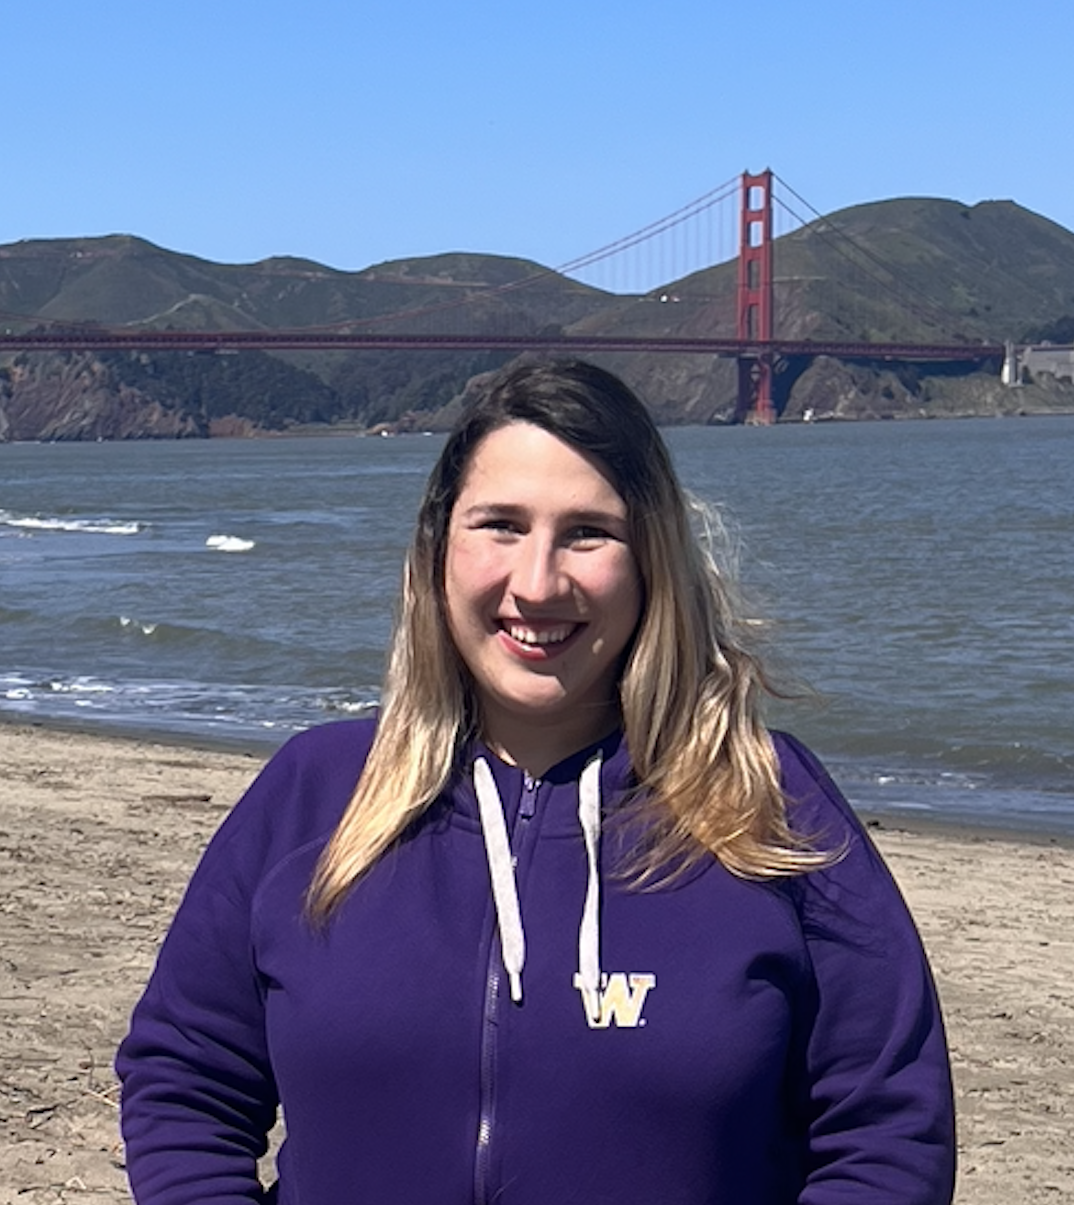 Kate stands in a purple UW sweater in front of Crissy Beach, a sandy California beach with the ocean glistening and the golden gate bridge in the background